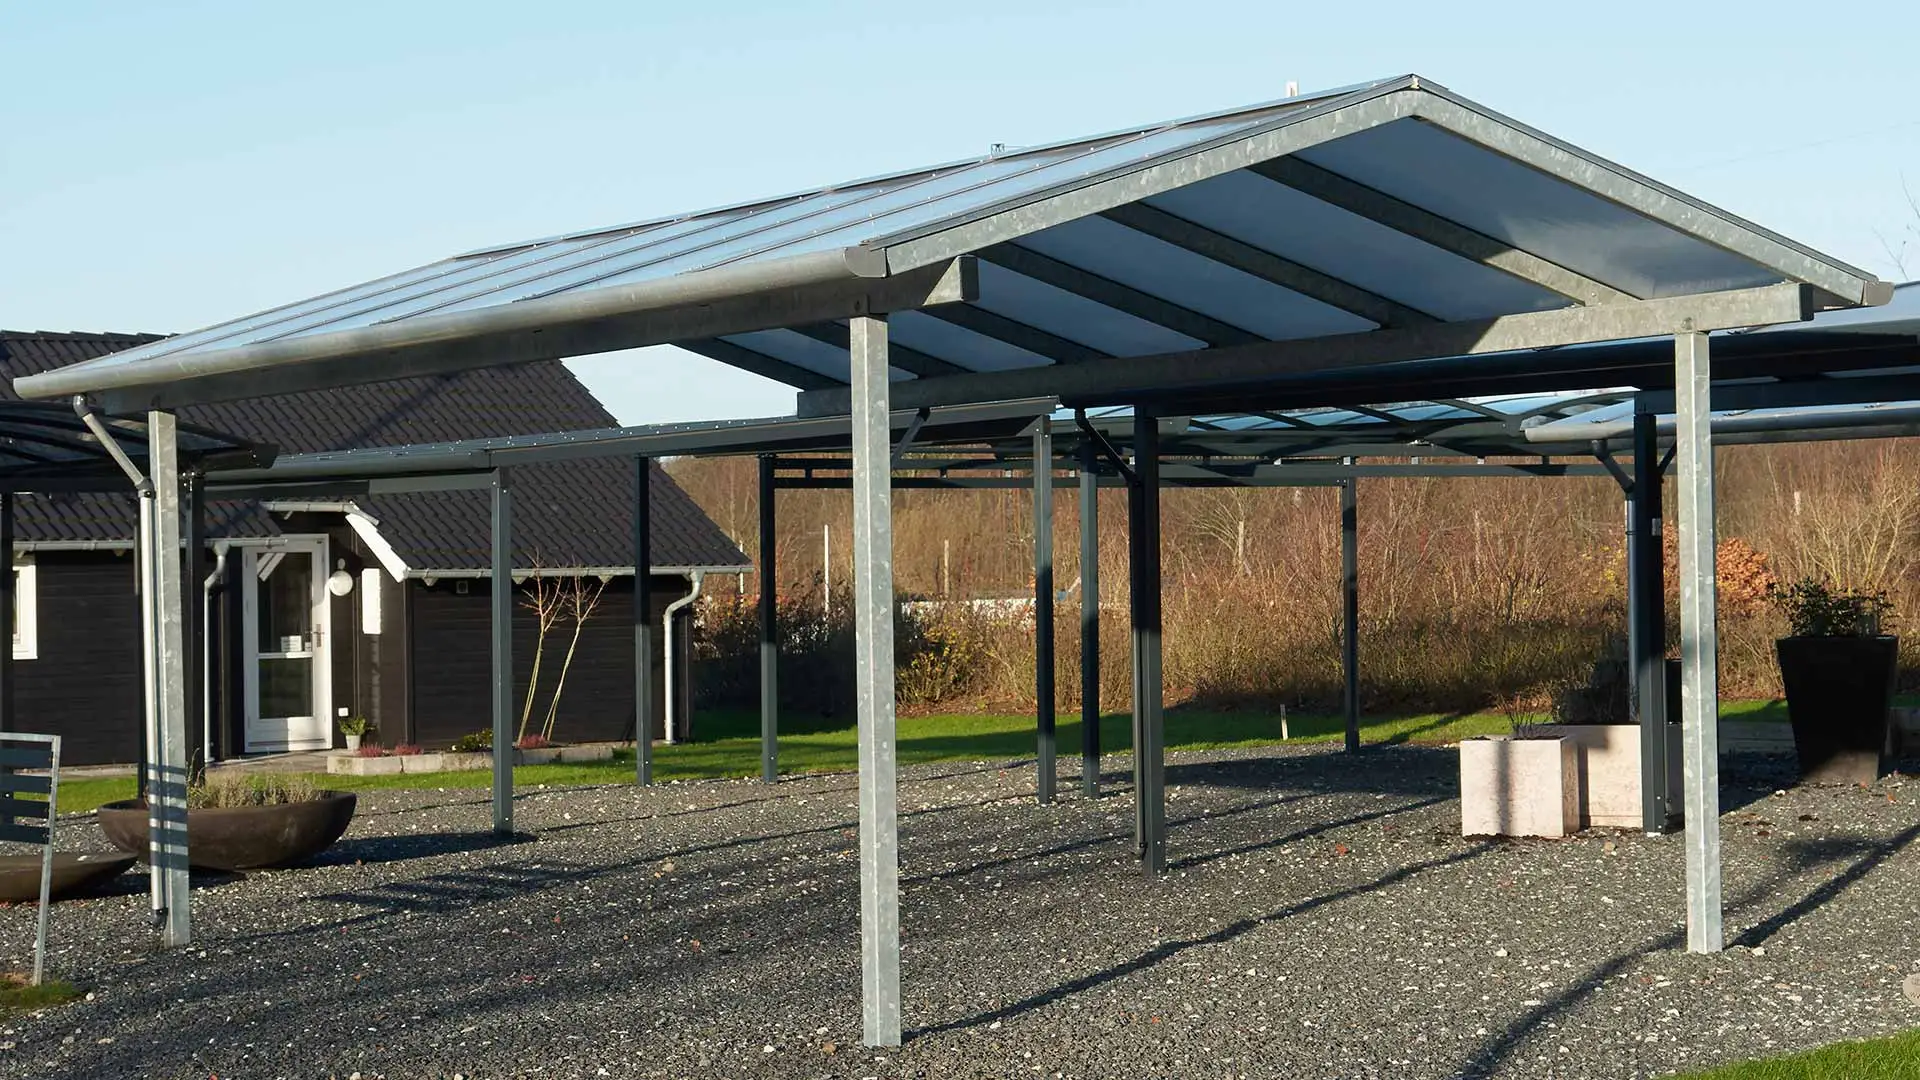 Why Carports Are a Cost-Effective Way to Protect Cars, Boats, & More